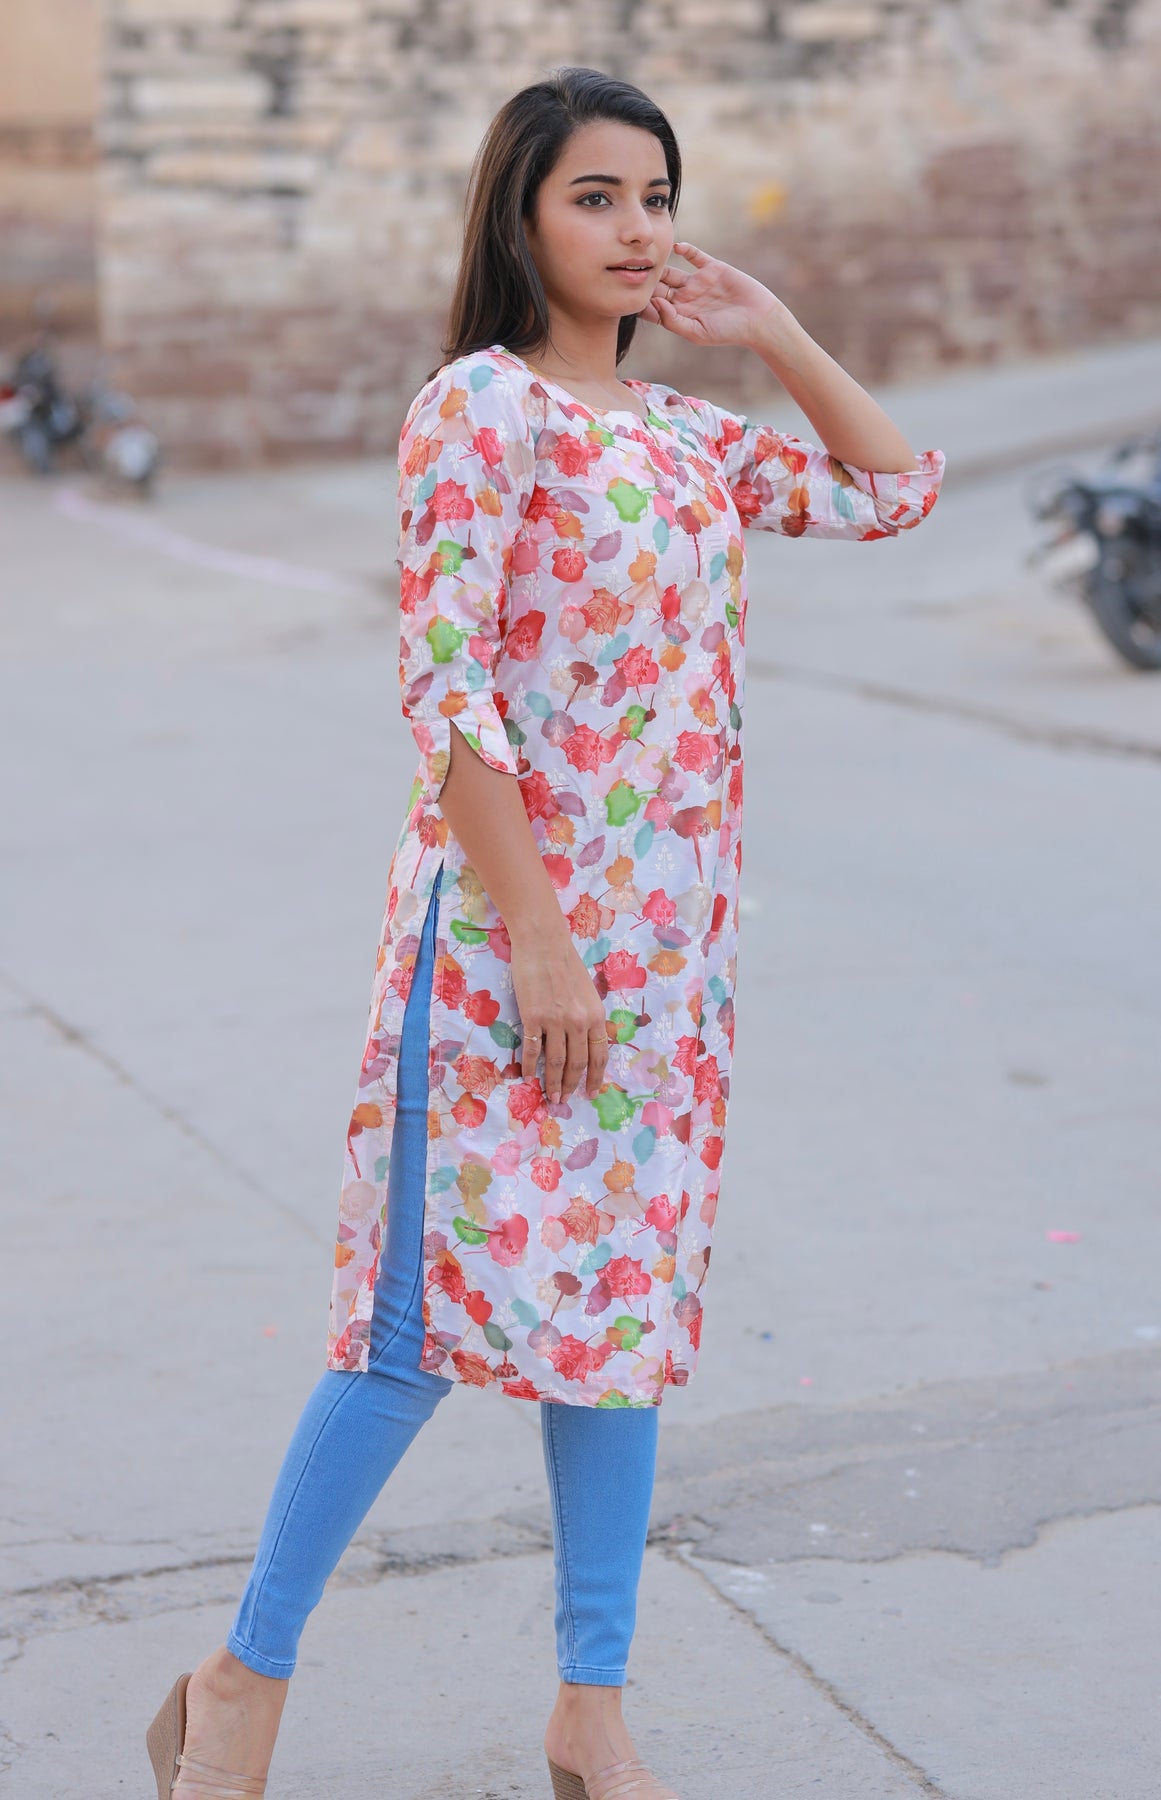 Kurtis on sale Trendy short kurti designs you can pair with leggings    Times of India